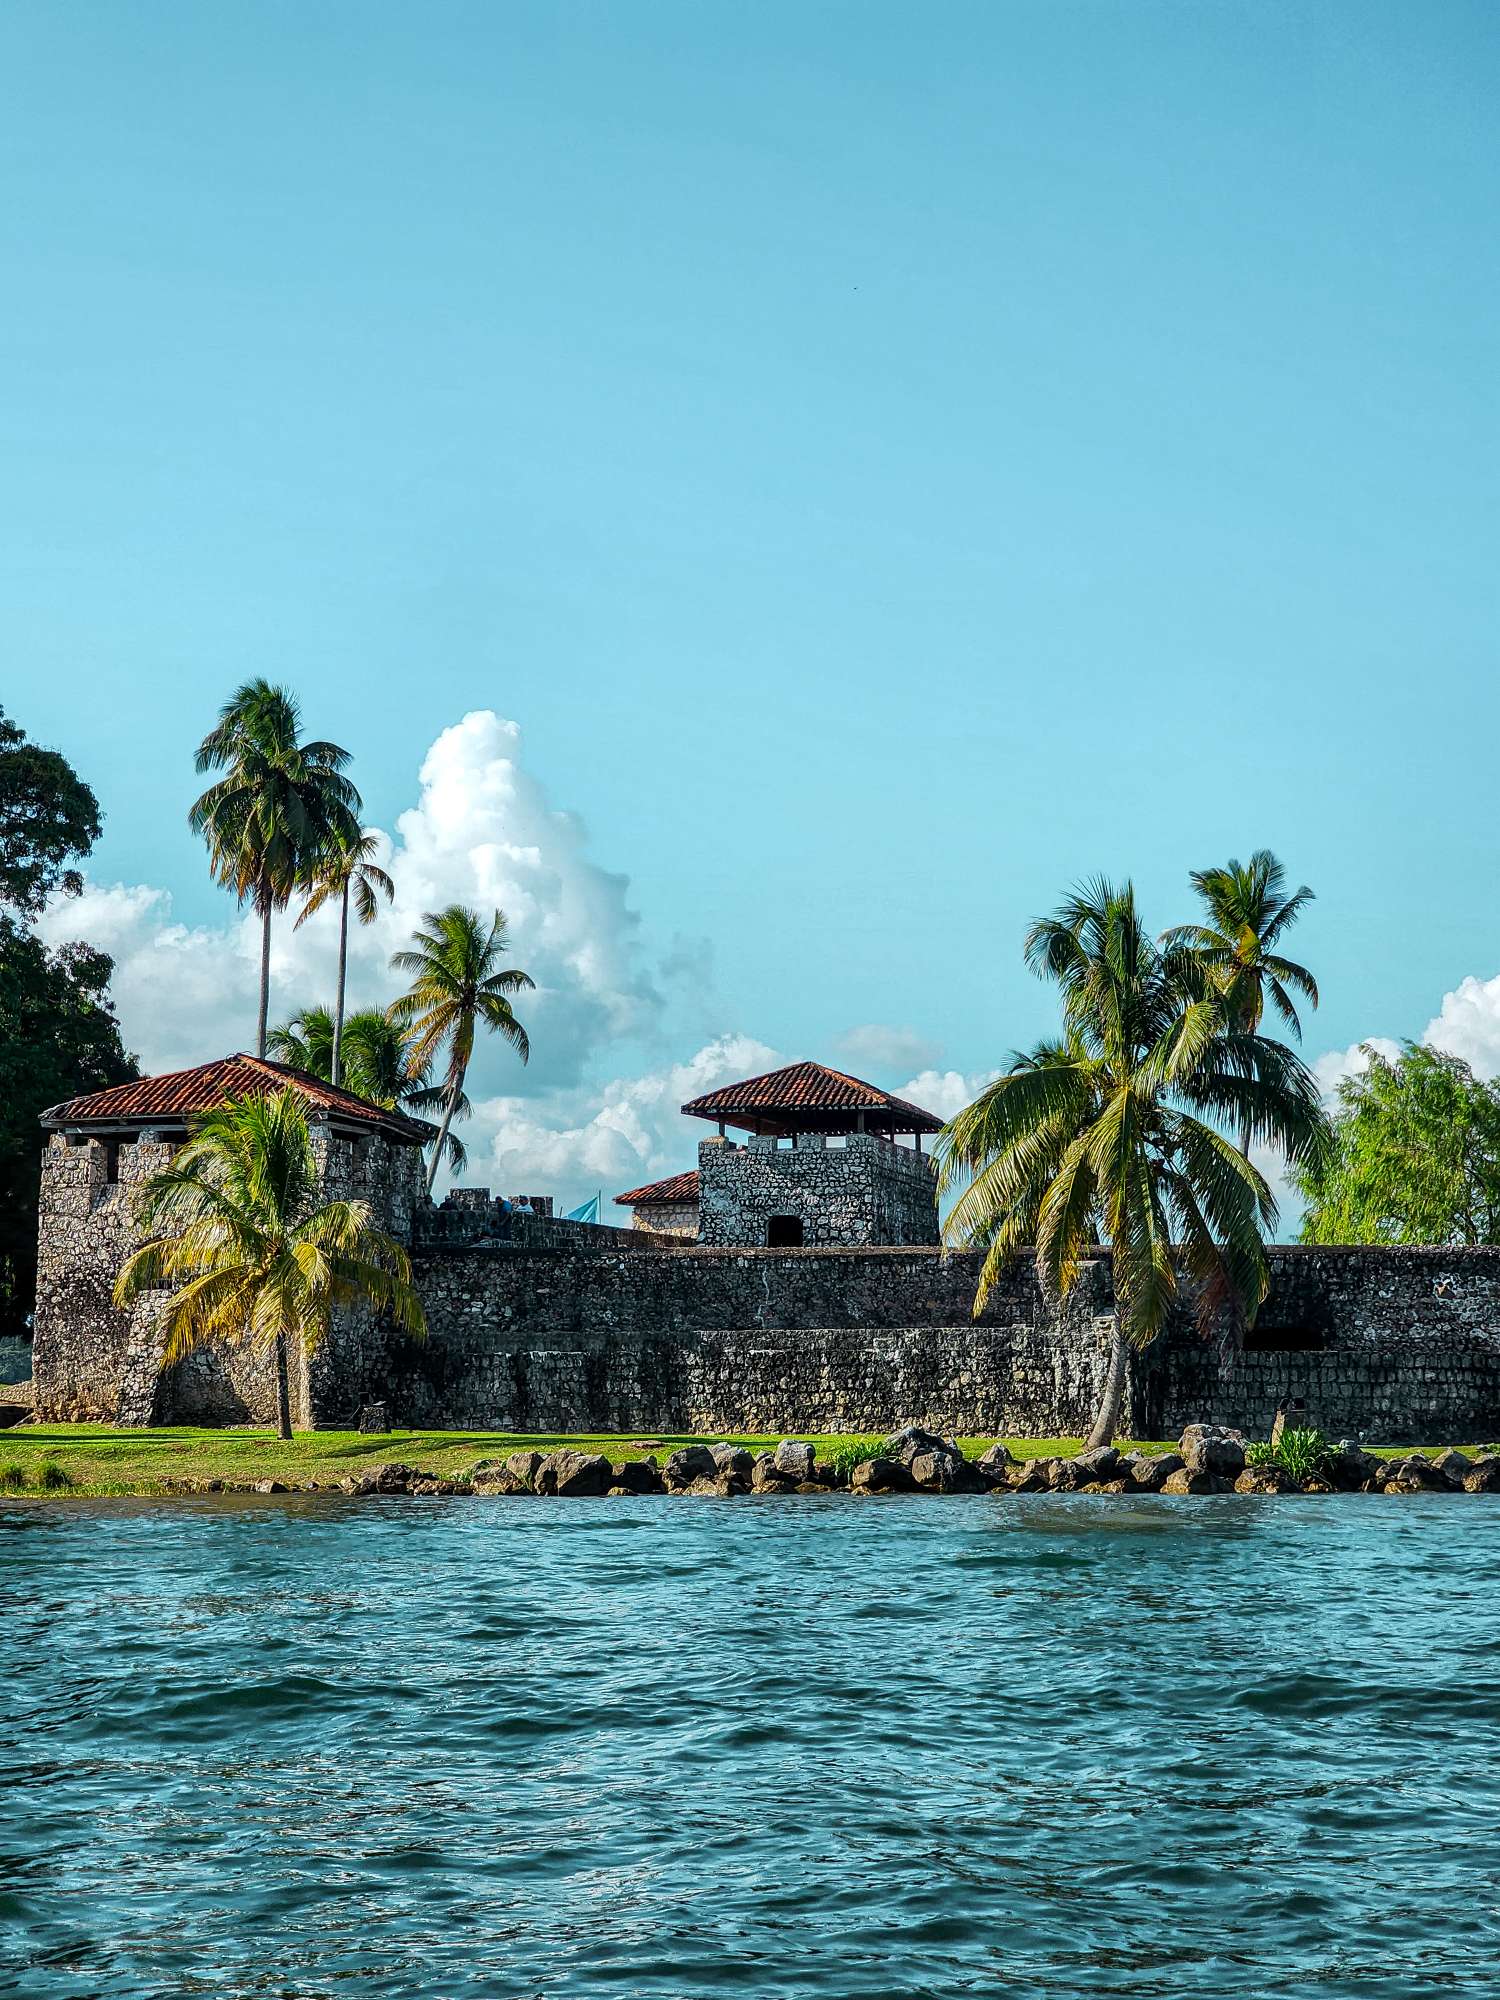 One Month In Central America Itinerary - Anna Sherchand